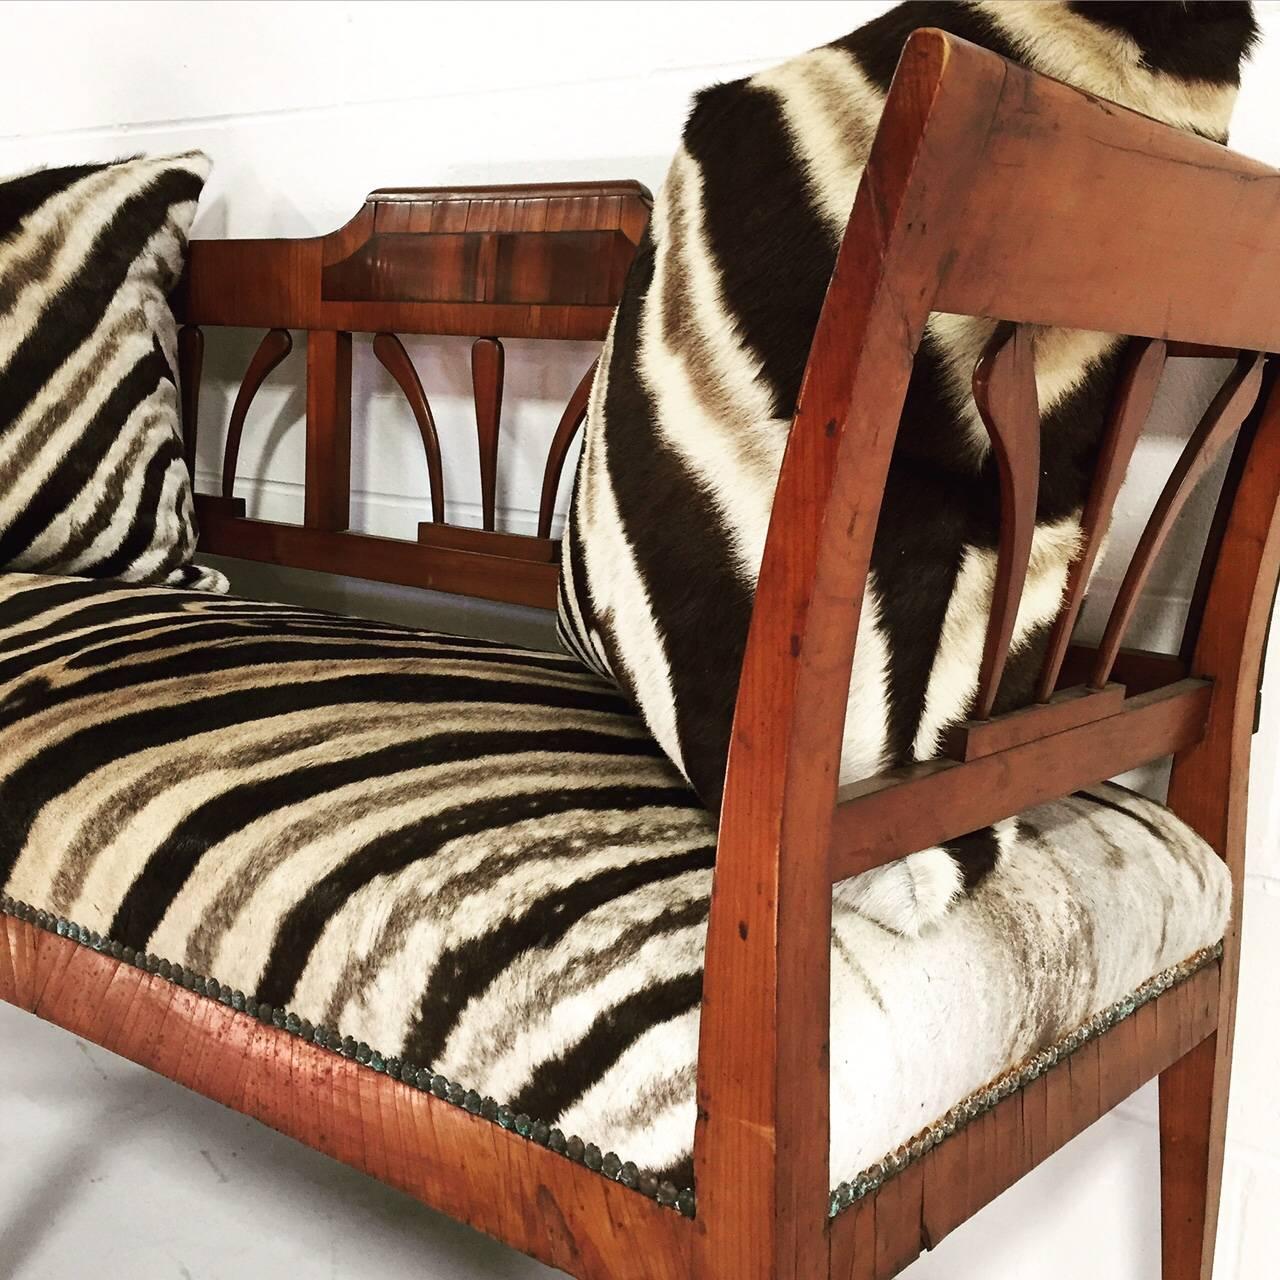 19th Century Fruitwood and Rosewood Settee in Zebra Hide with Zebra Pillows 2